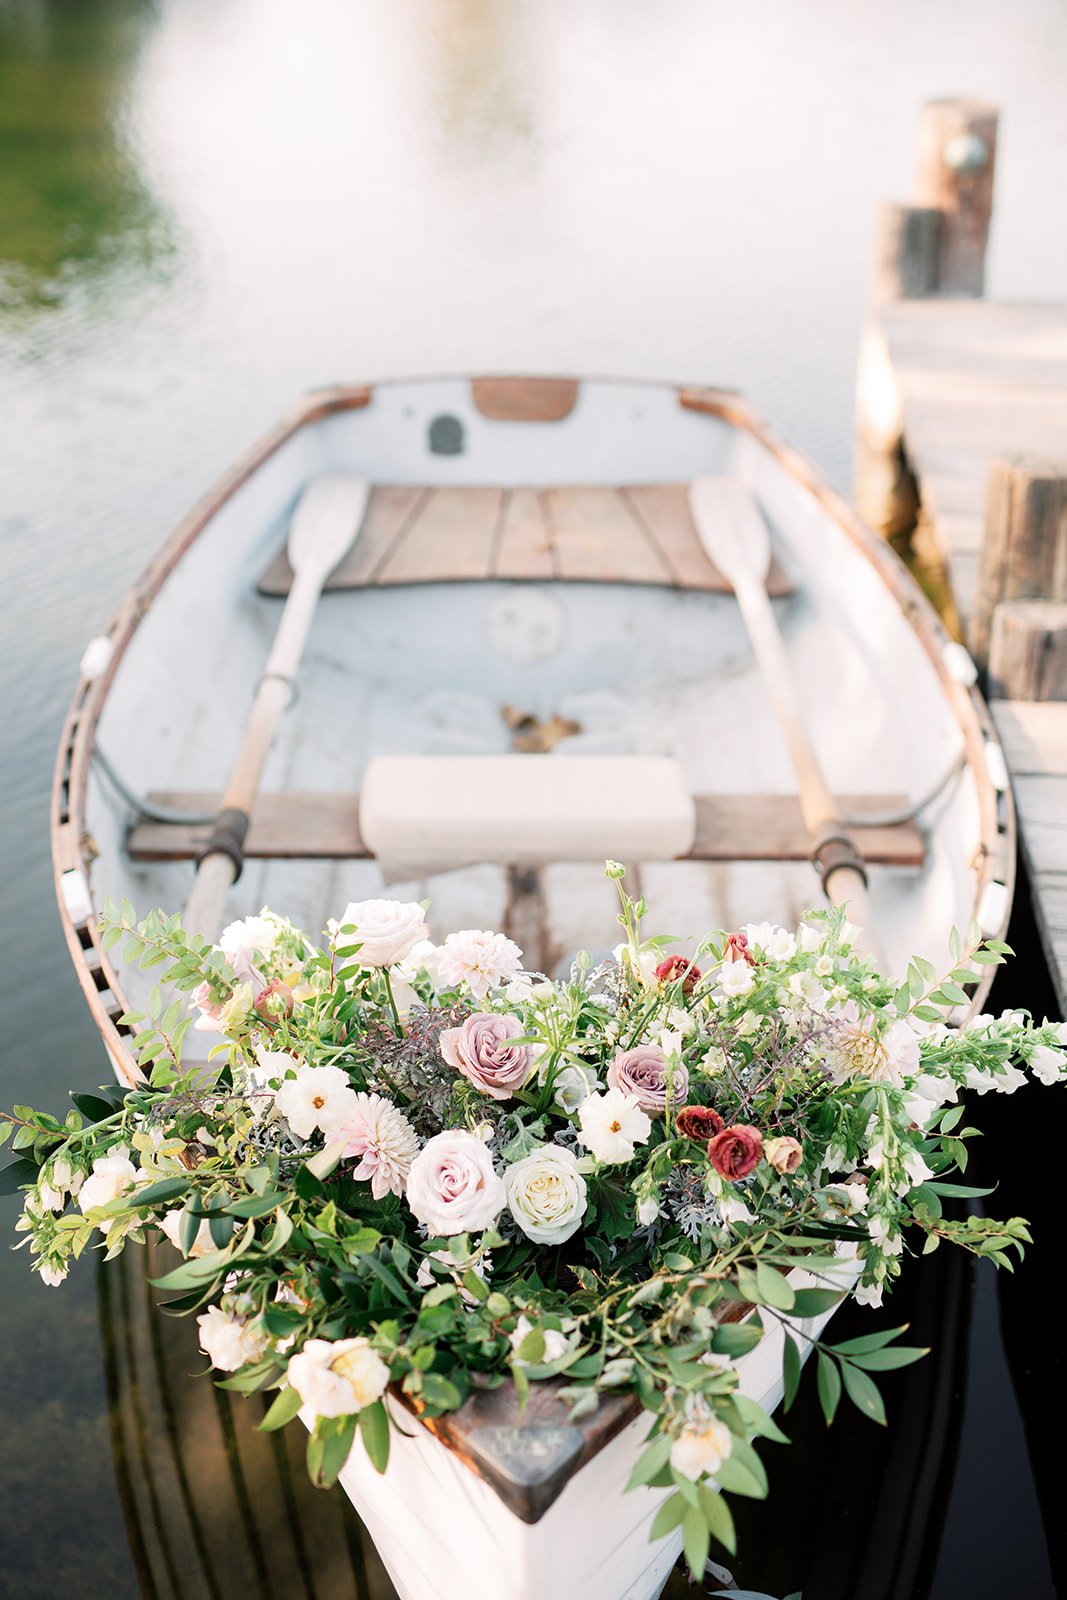 Rowboat with flowers on a lake